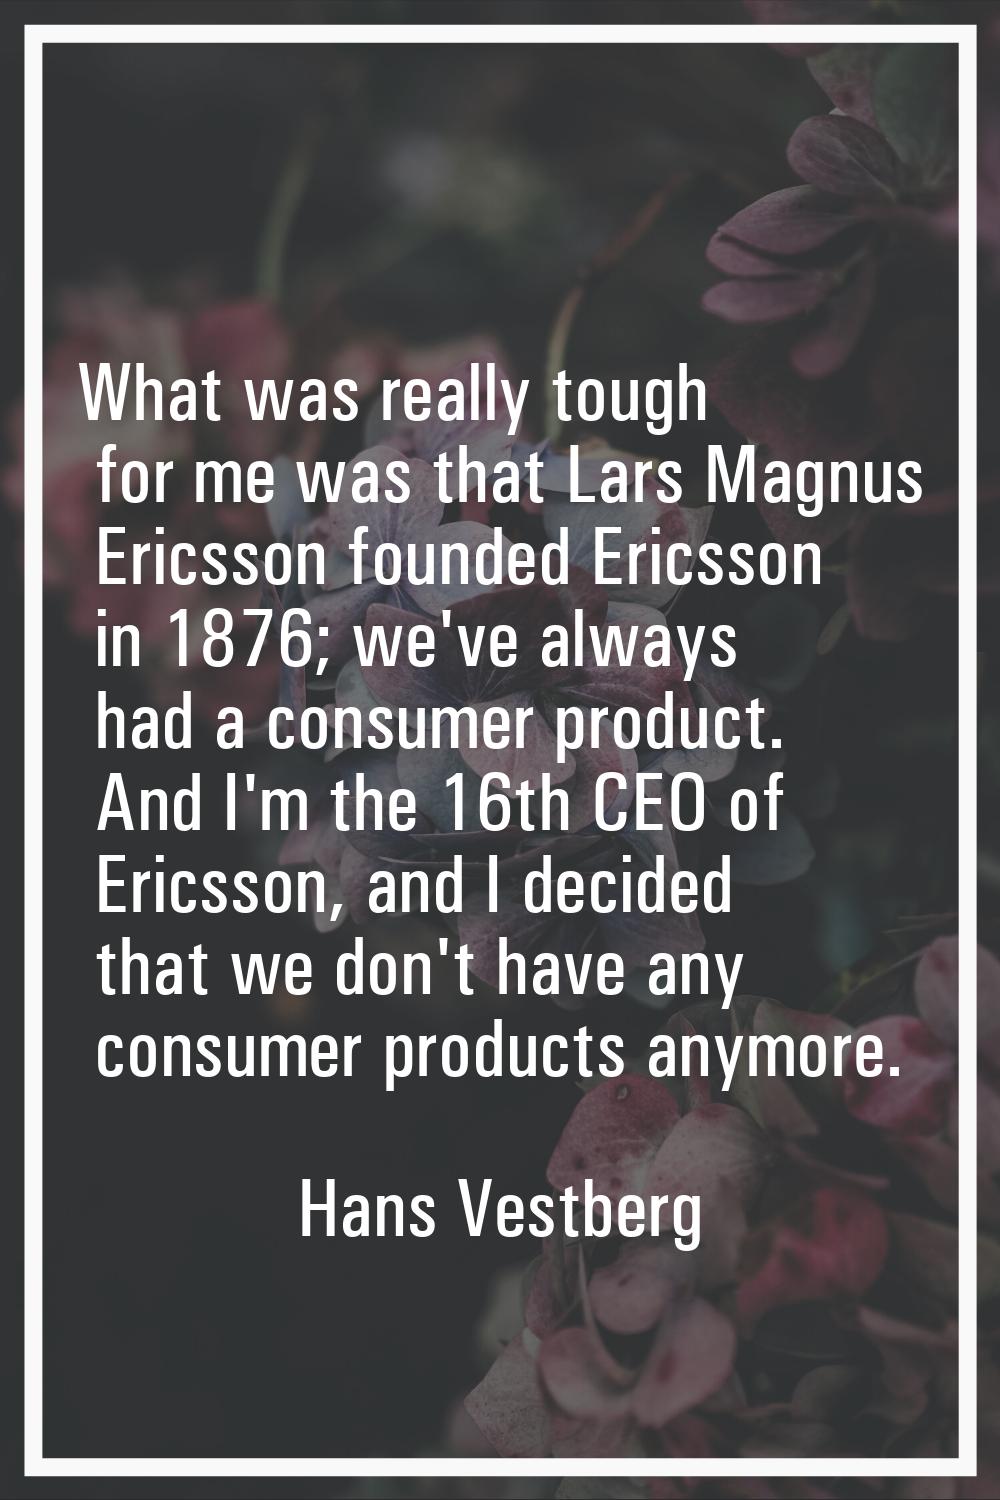 What was really tough for me was that Lars Magnus Ericsson founded Ericsson in 1876; we've always h